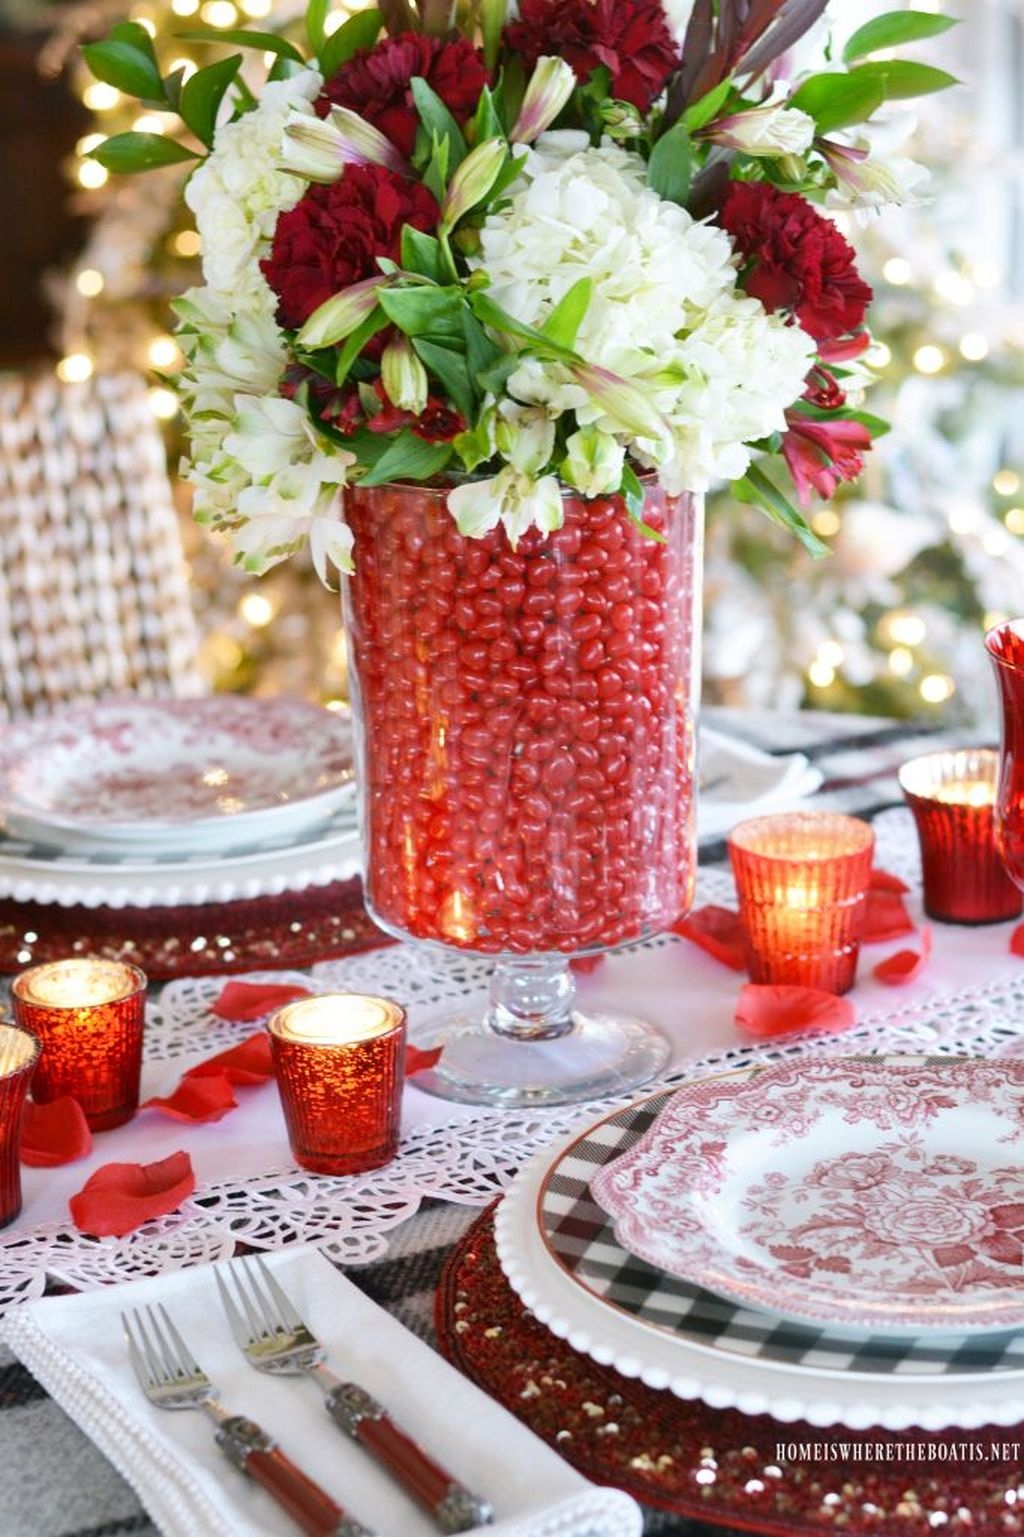 Perfect Valentine’s Day Romantic Dining Table Decor Ideas For Two People 35